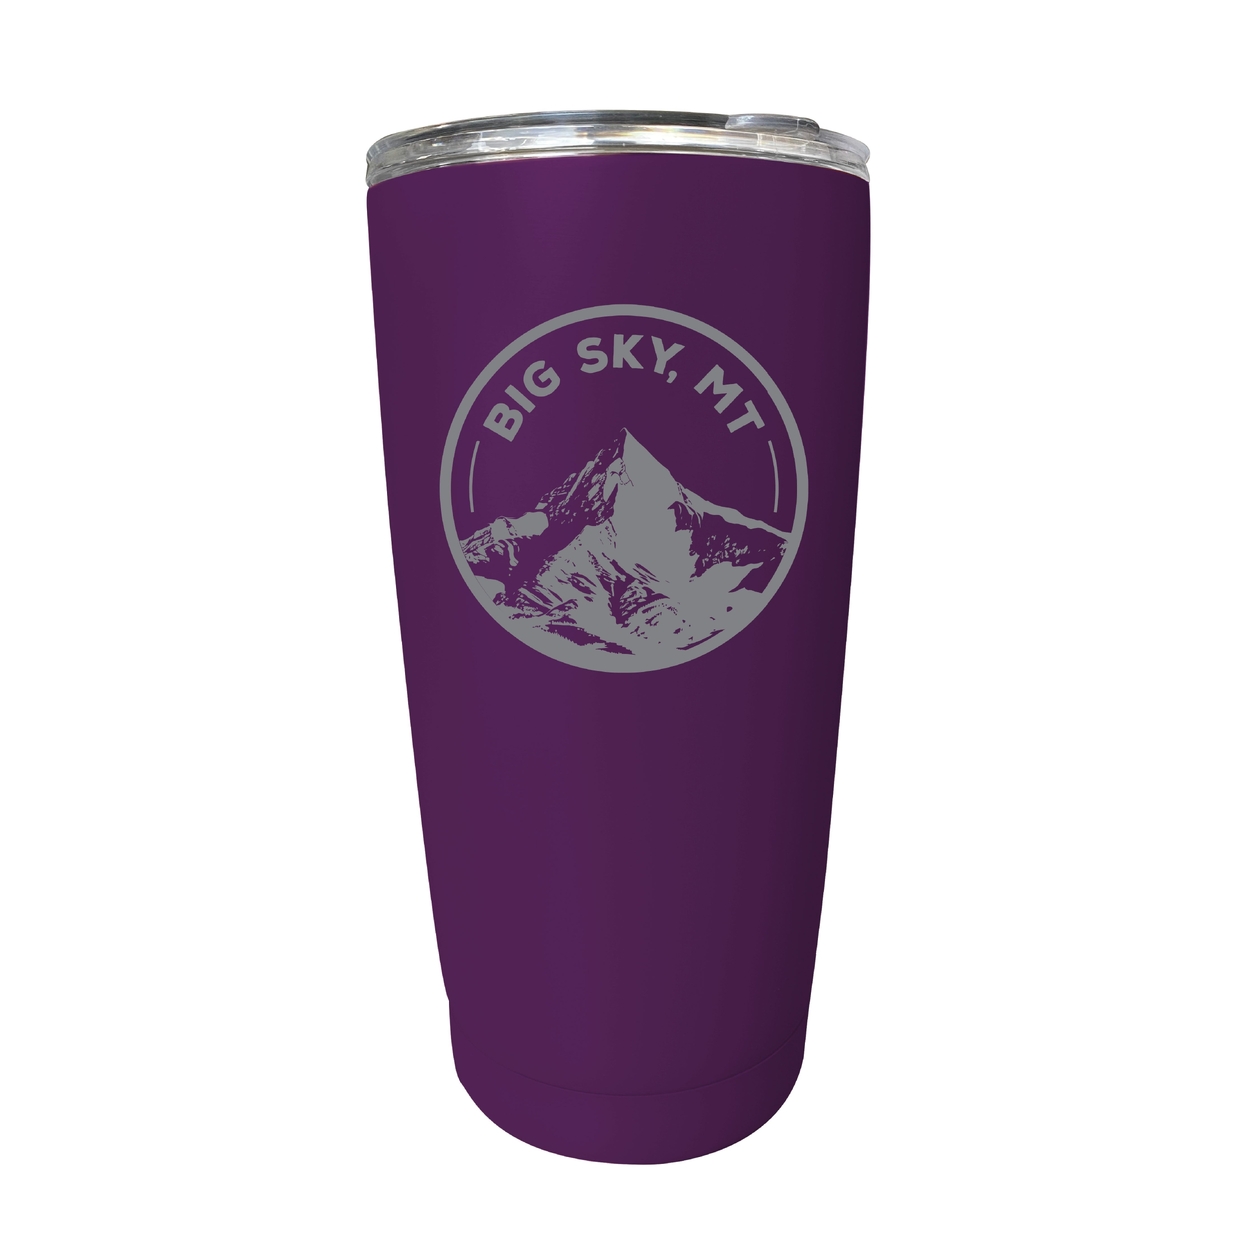 Big Sky Montana Souvenir 16 Oz Engraved Stainless Steel Insulated Tumbler - Purple,,2-Pack